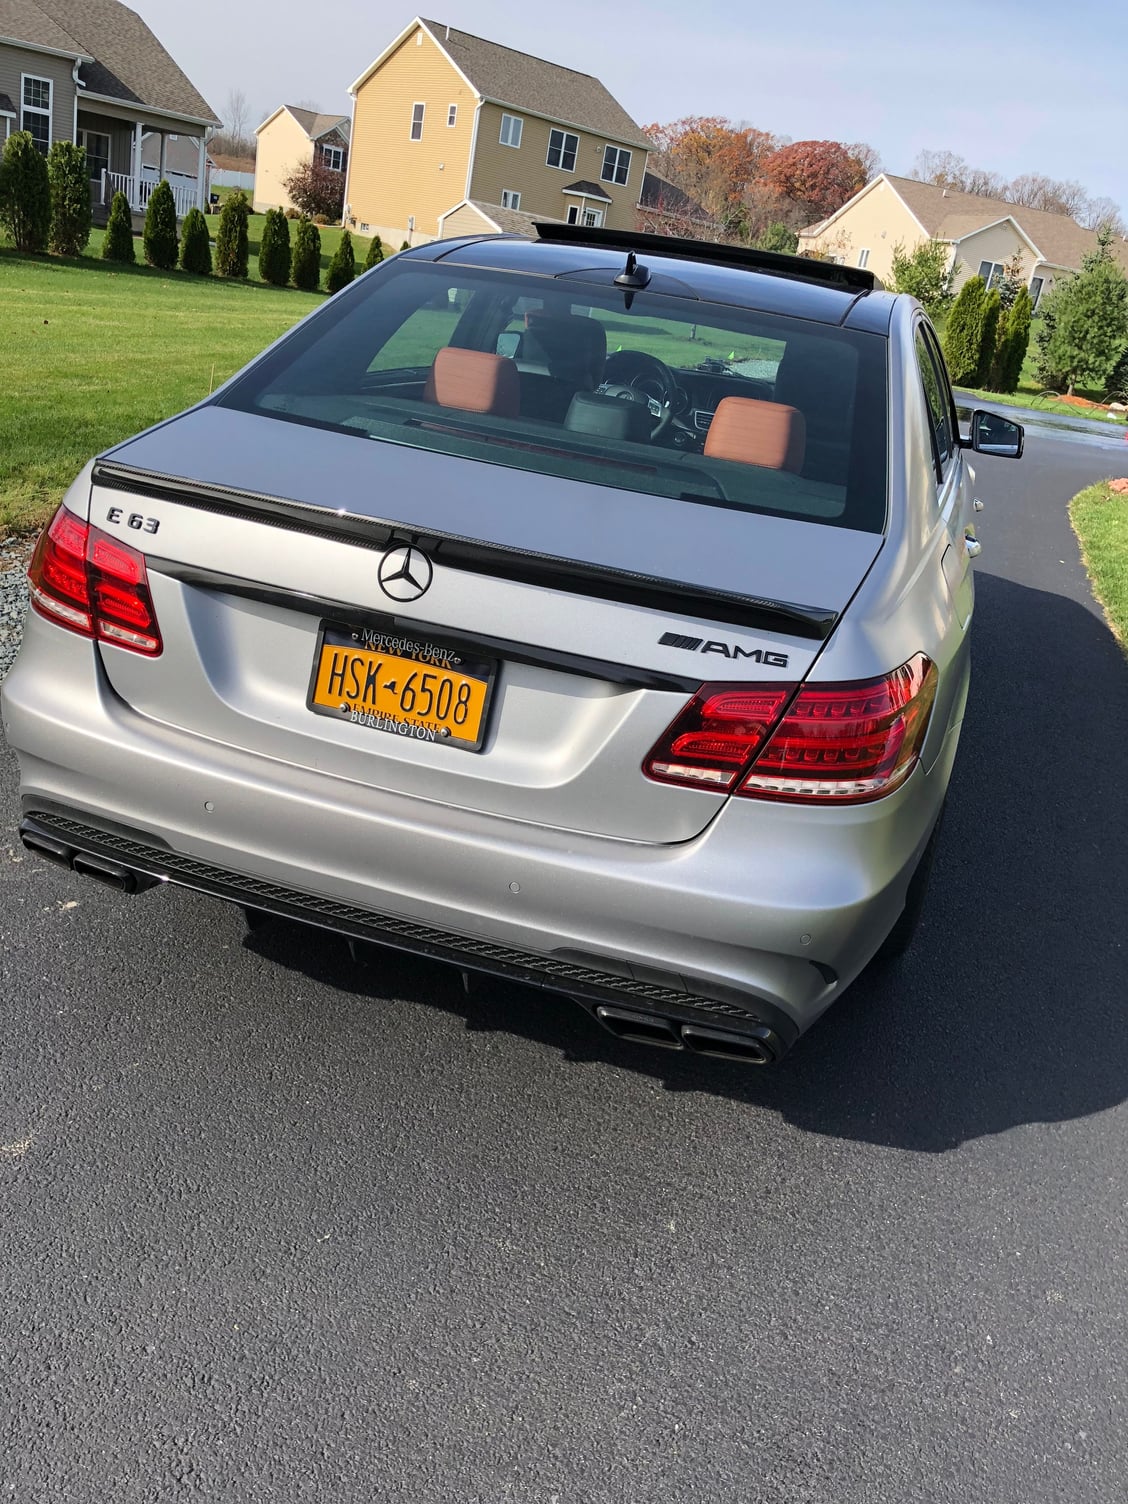 2014 Mercedes-Benz E63 AMG - E63 AMG 1 of 1 high spec - Used - VIN WDDHF9CB8EA976229 - 38,500 Miles - 8 cyl - AWD - Automatic - Sedan - Other - Clifton Park, NY 12065, United States